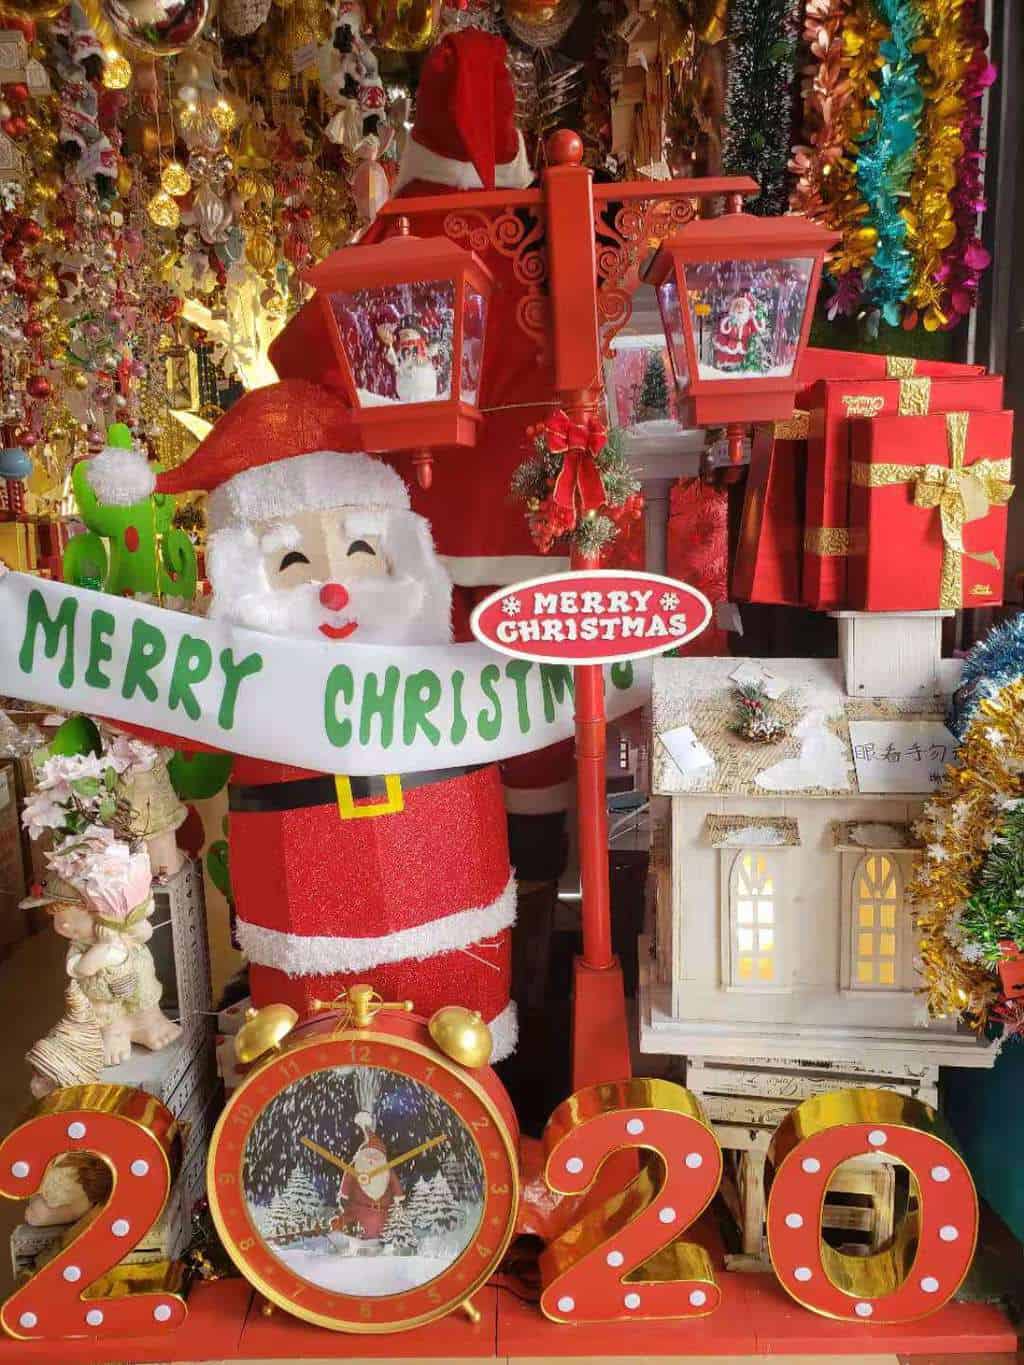 Featured image for “Where To Buy Christmas Decorations In Shenzhen”